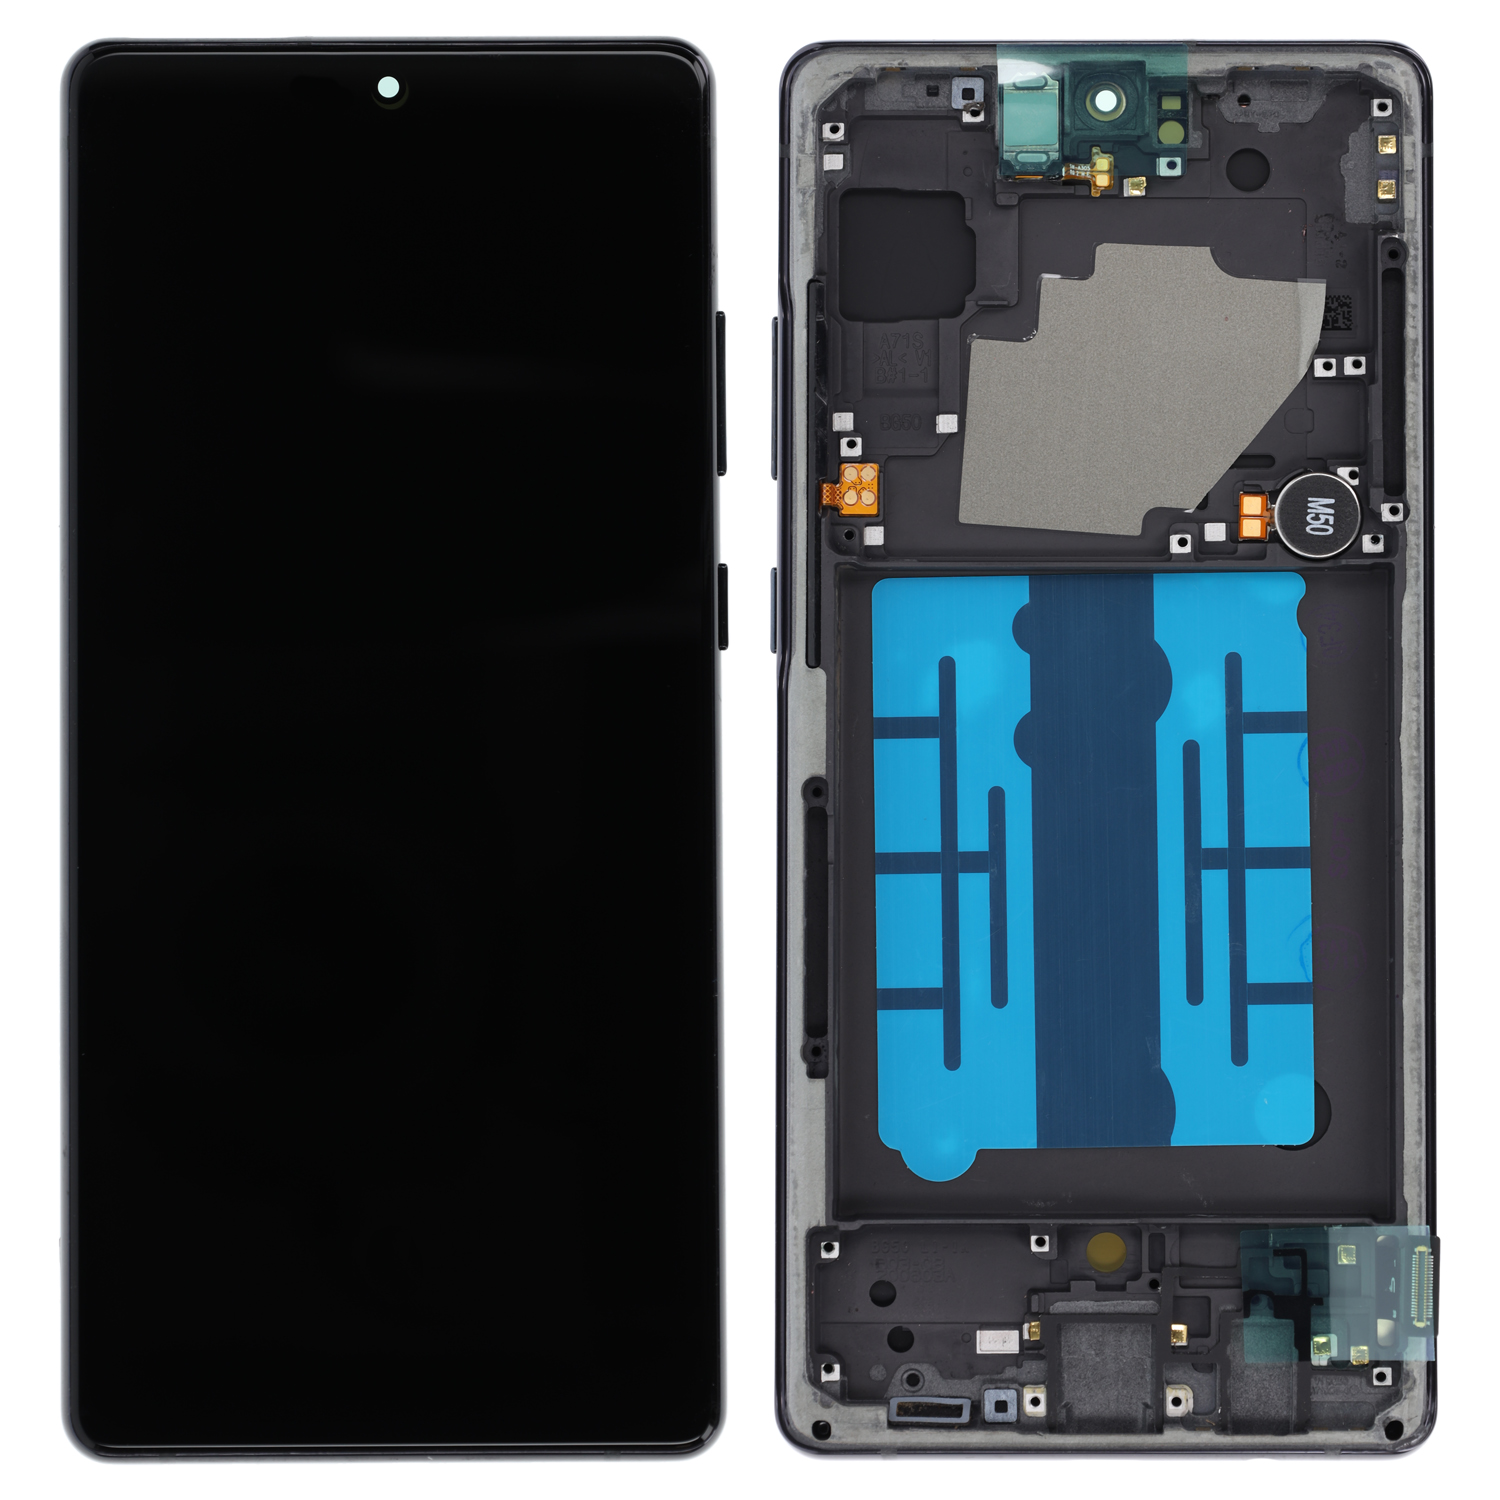 LCD Display compatible to Samsung Galaxy A71 5G (A716)  with frame, Black (Soft-OLED)